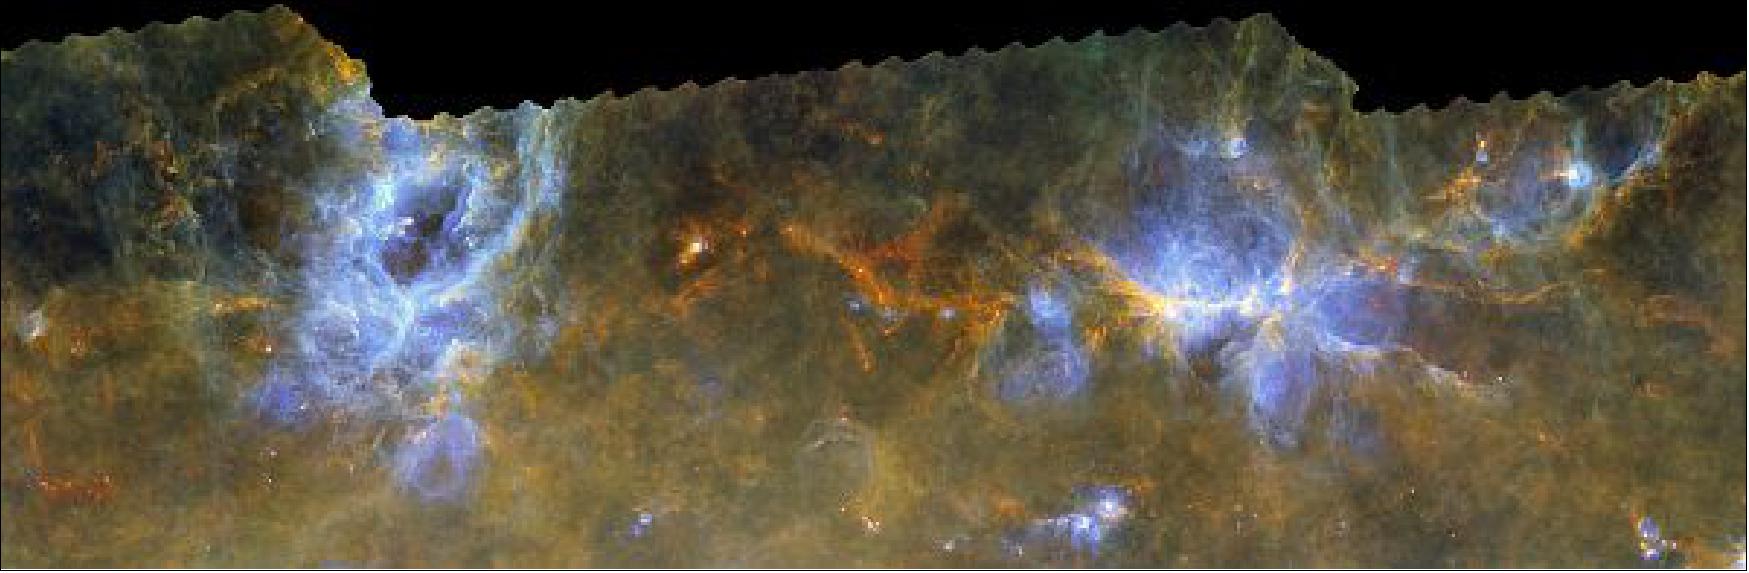 Figure 44: Herschel's view of the War and Peace and Cat's Paw nebulas (image credit: ESA/Herschel/PACS, SPIRE/Hi-GAL Project, Ref. 48)